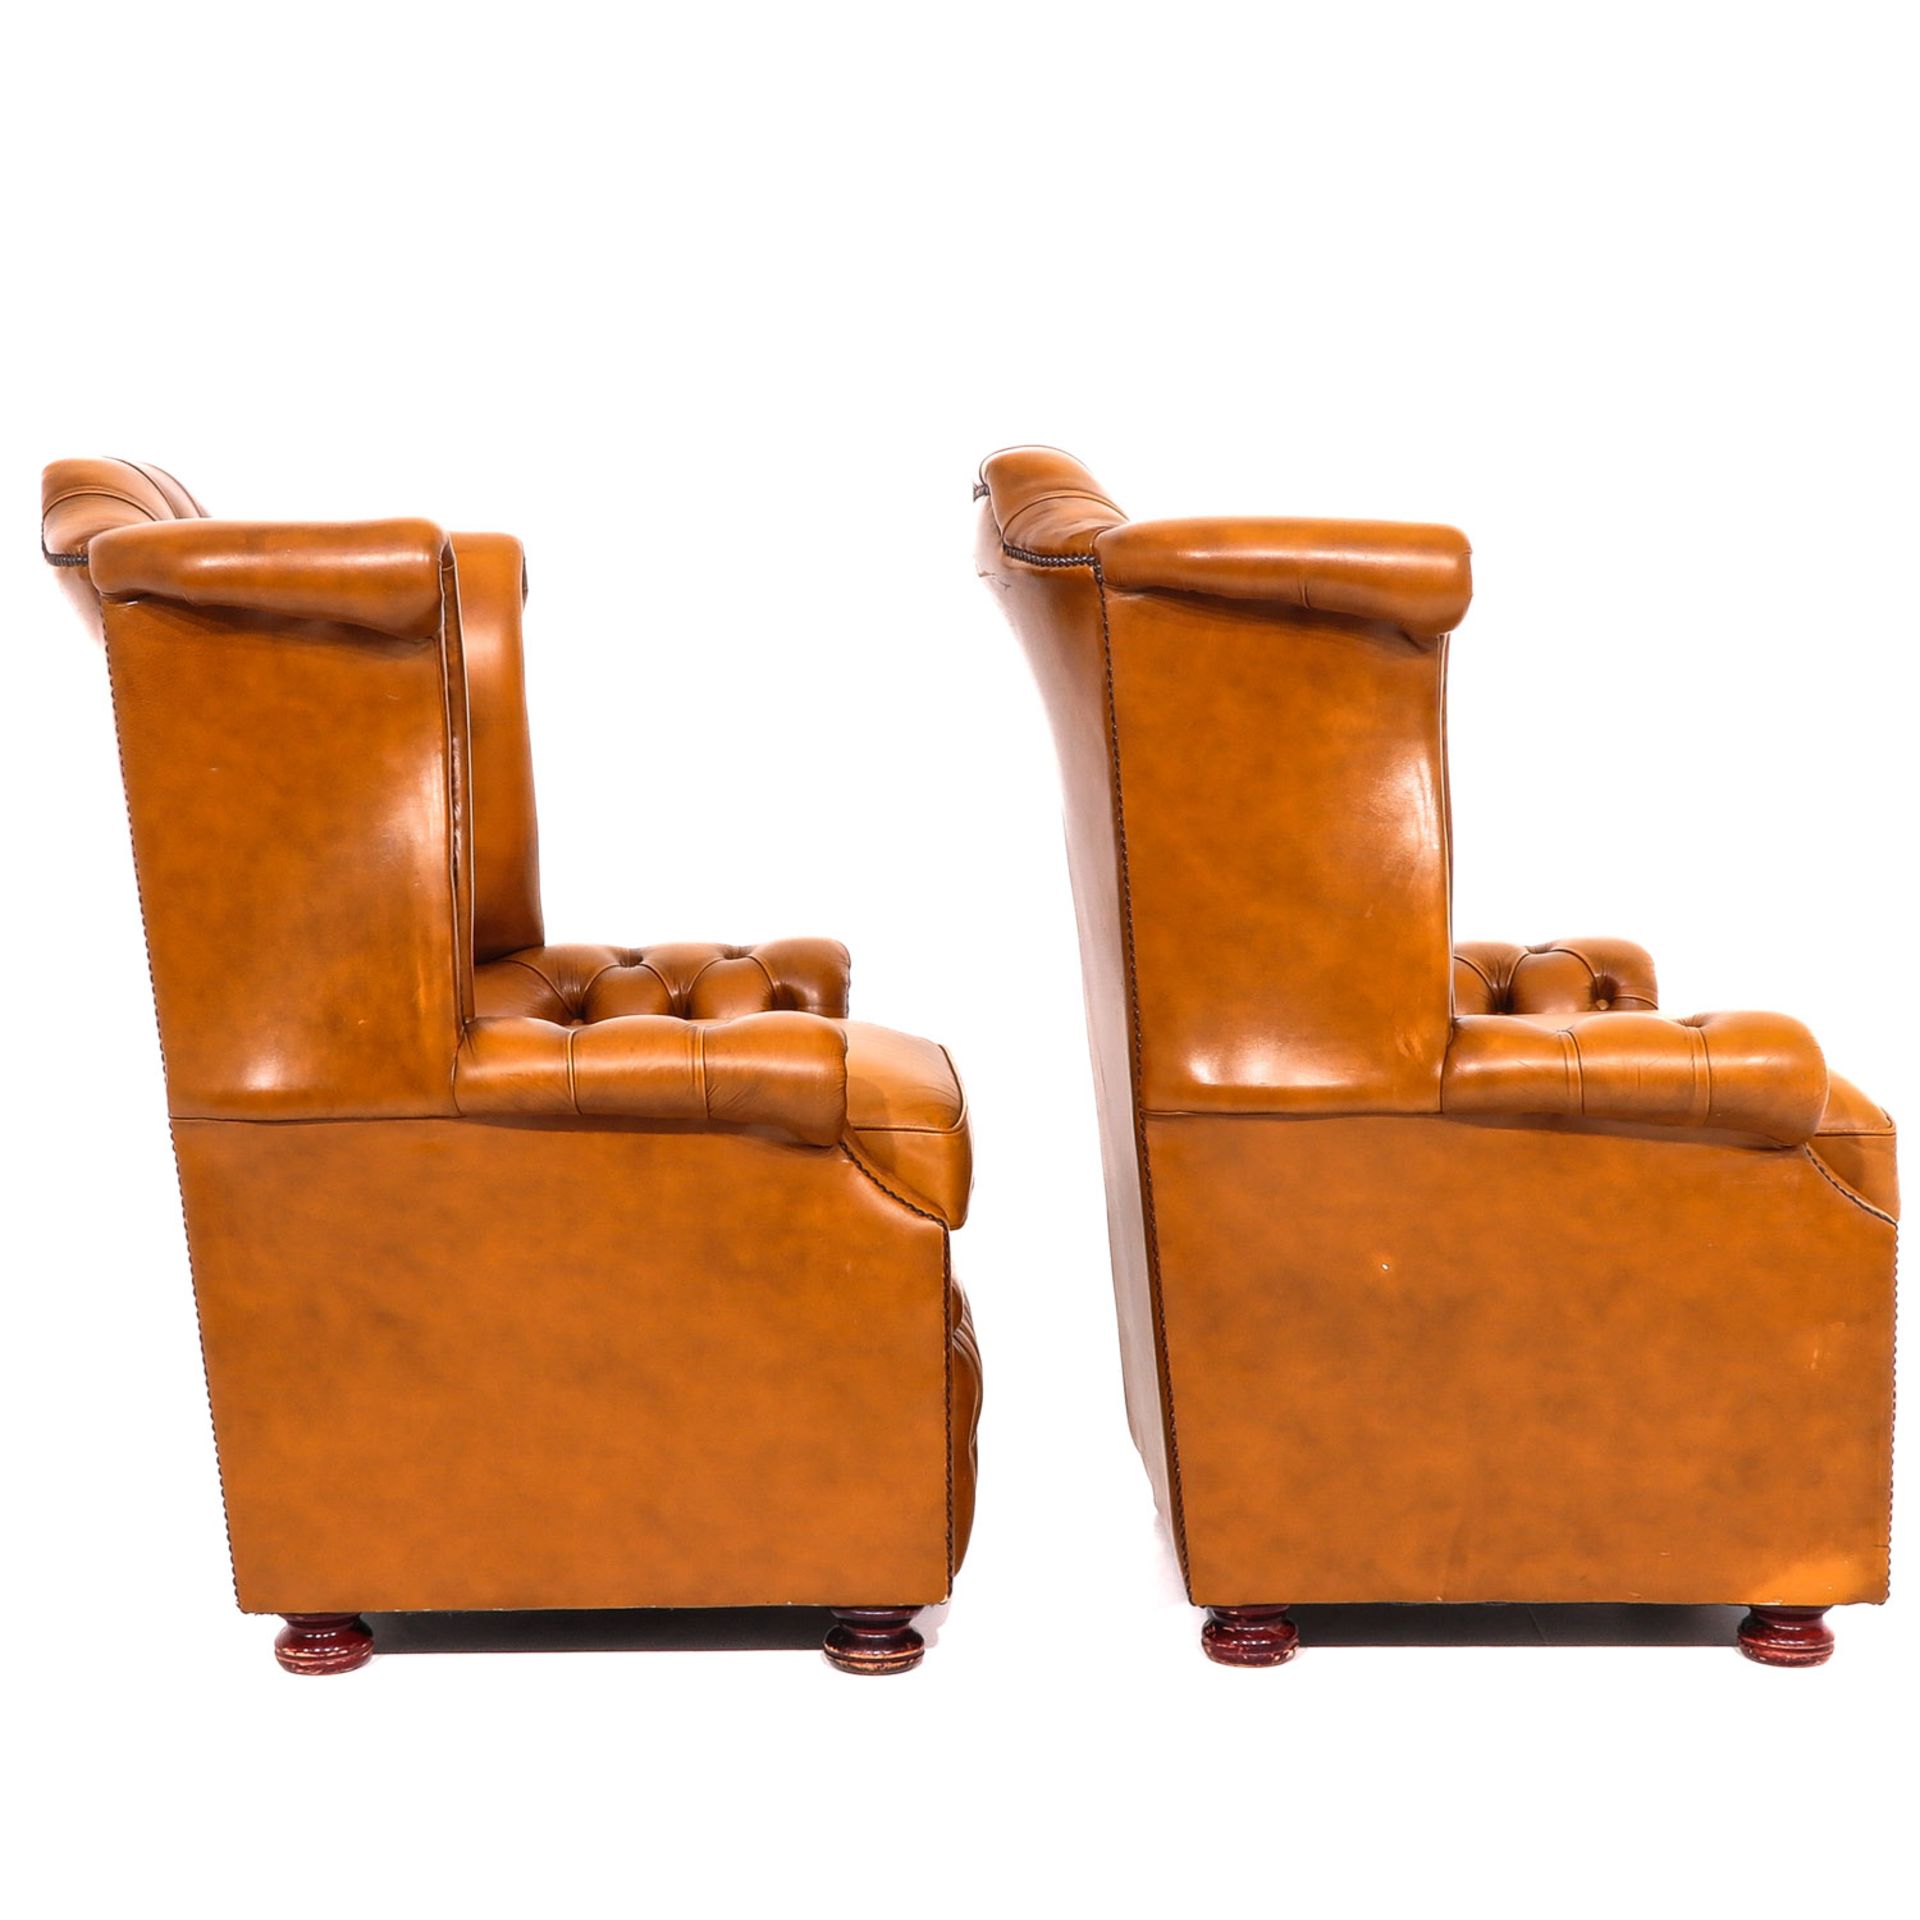 A Pair of Springvale English Chesterfield Chairs - Image 4 of 10